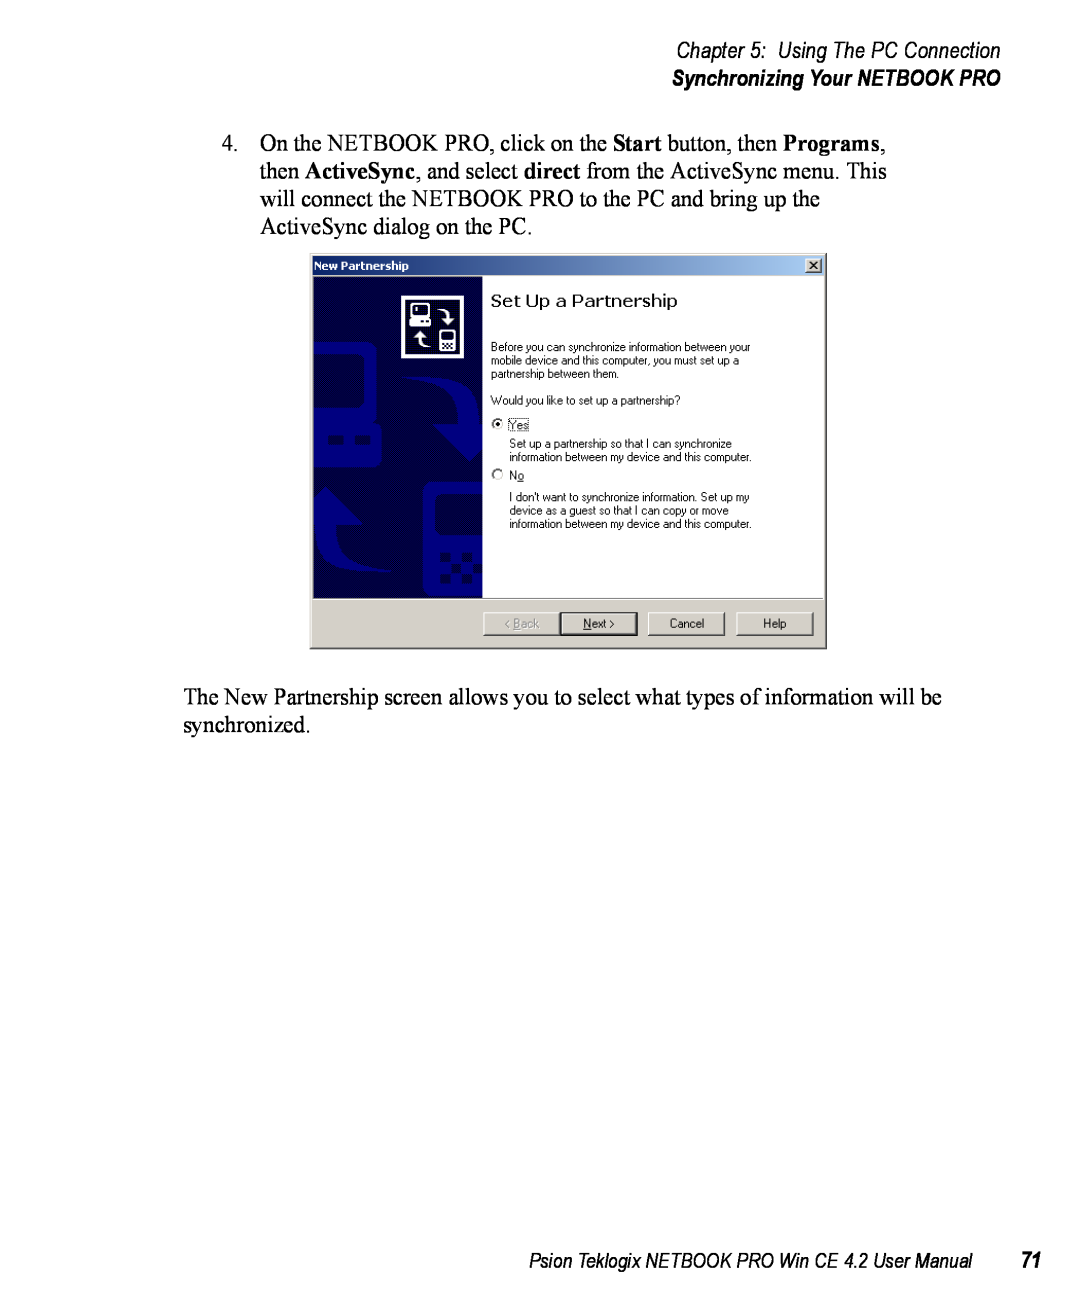 Psion Teklogix Win CE 4.2 user manual Synchronizing Your NETBOOK PRO, Using The PC Connection 